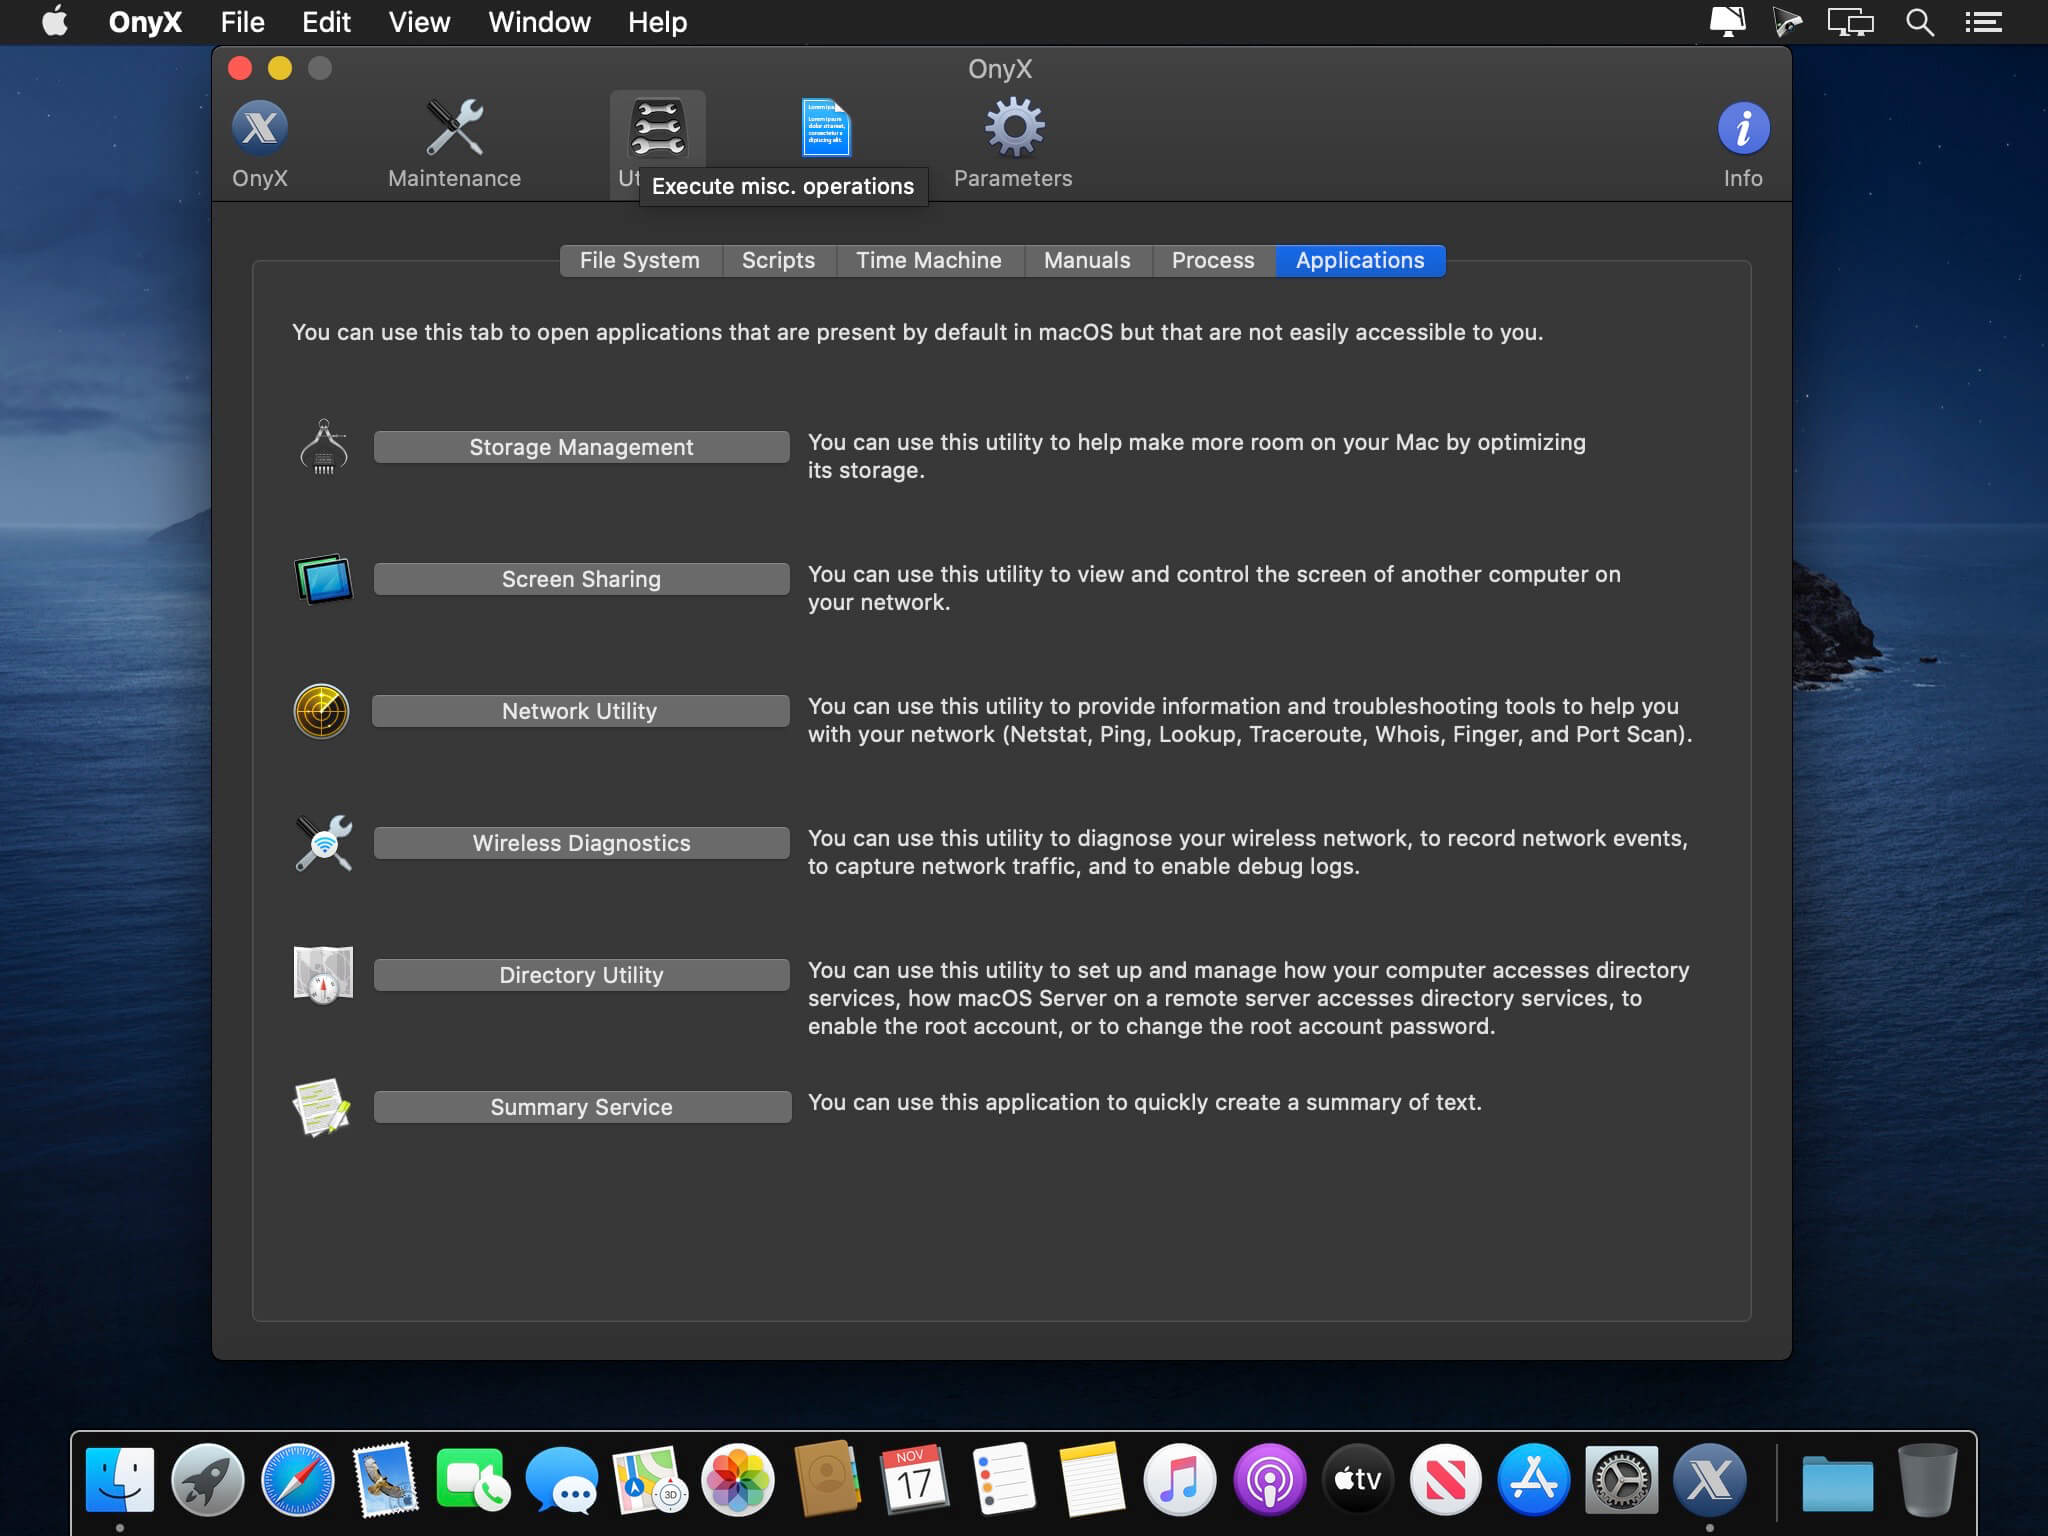 onyx for macos